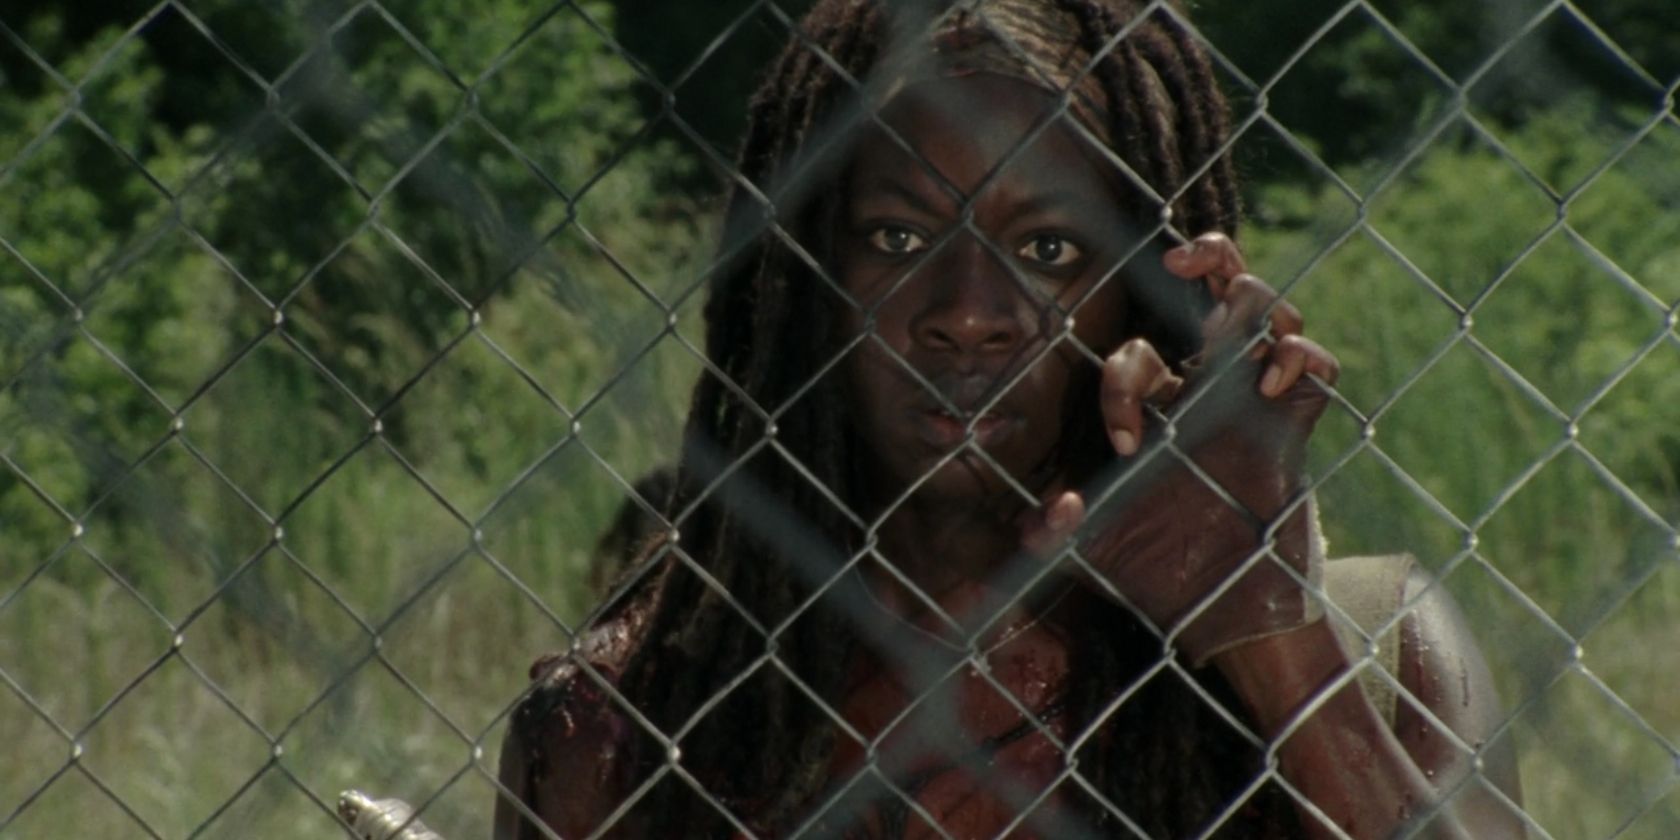 Michonne at the Prison in The Walking Dead